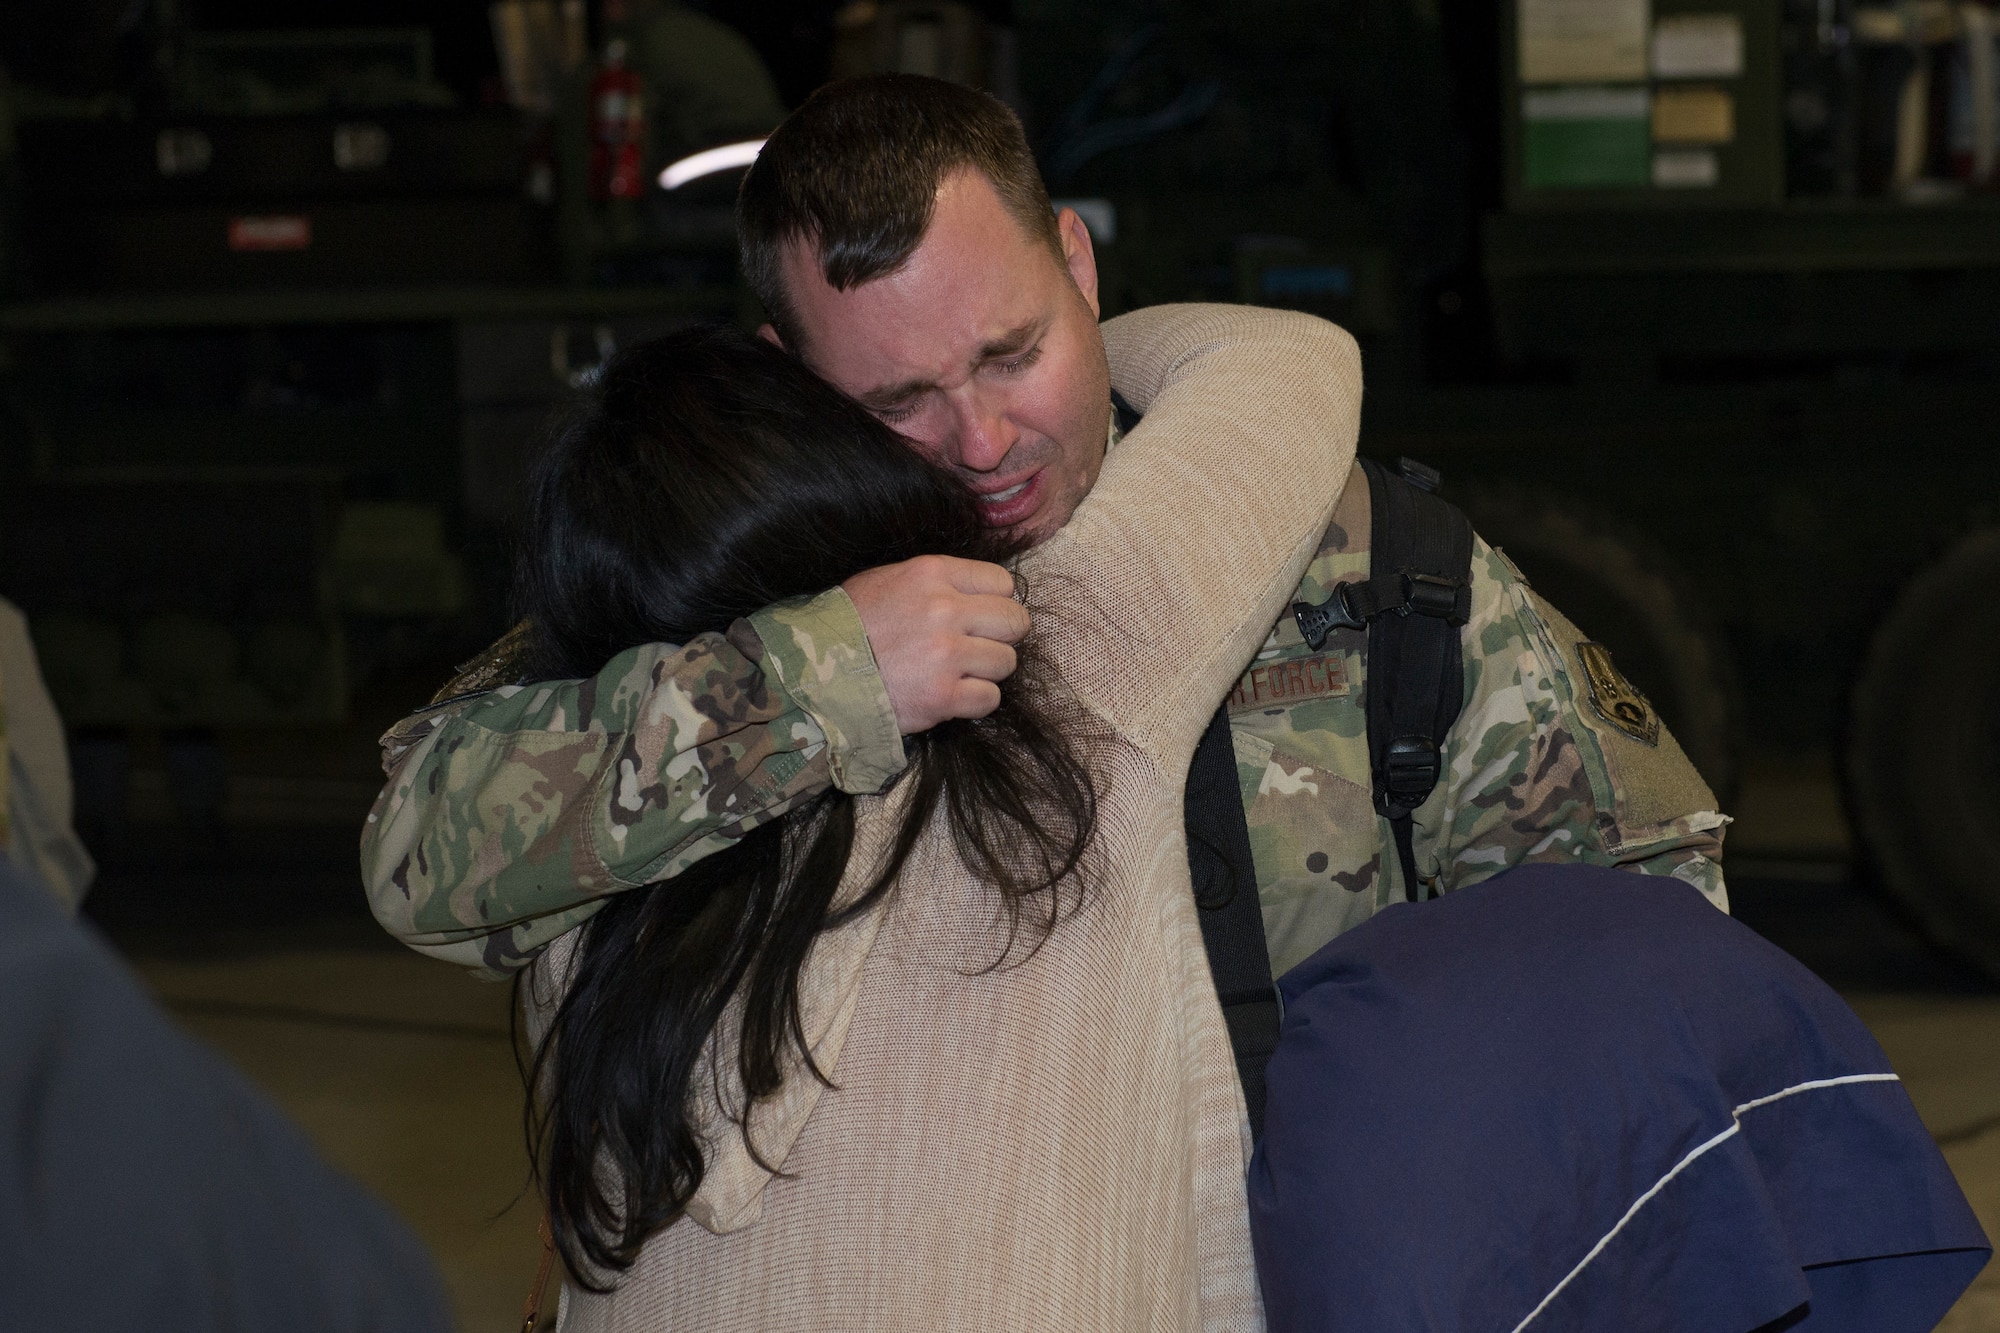 An Airman from the 726th Air Control Squadron returns from deployment and embraces his spouse, October 27, 2018, at Mountain Home Air Force Base, Idaho. over 100 Airmen from the 726th ACS deployed with mission of supporting communication between air craft and ground units. (U.S. Air Force photo by Senior Airman Tyrell Hall)